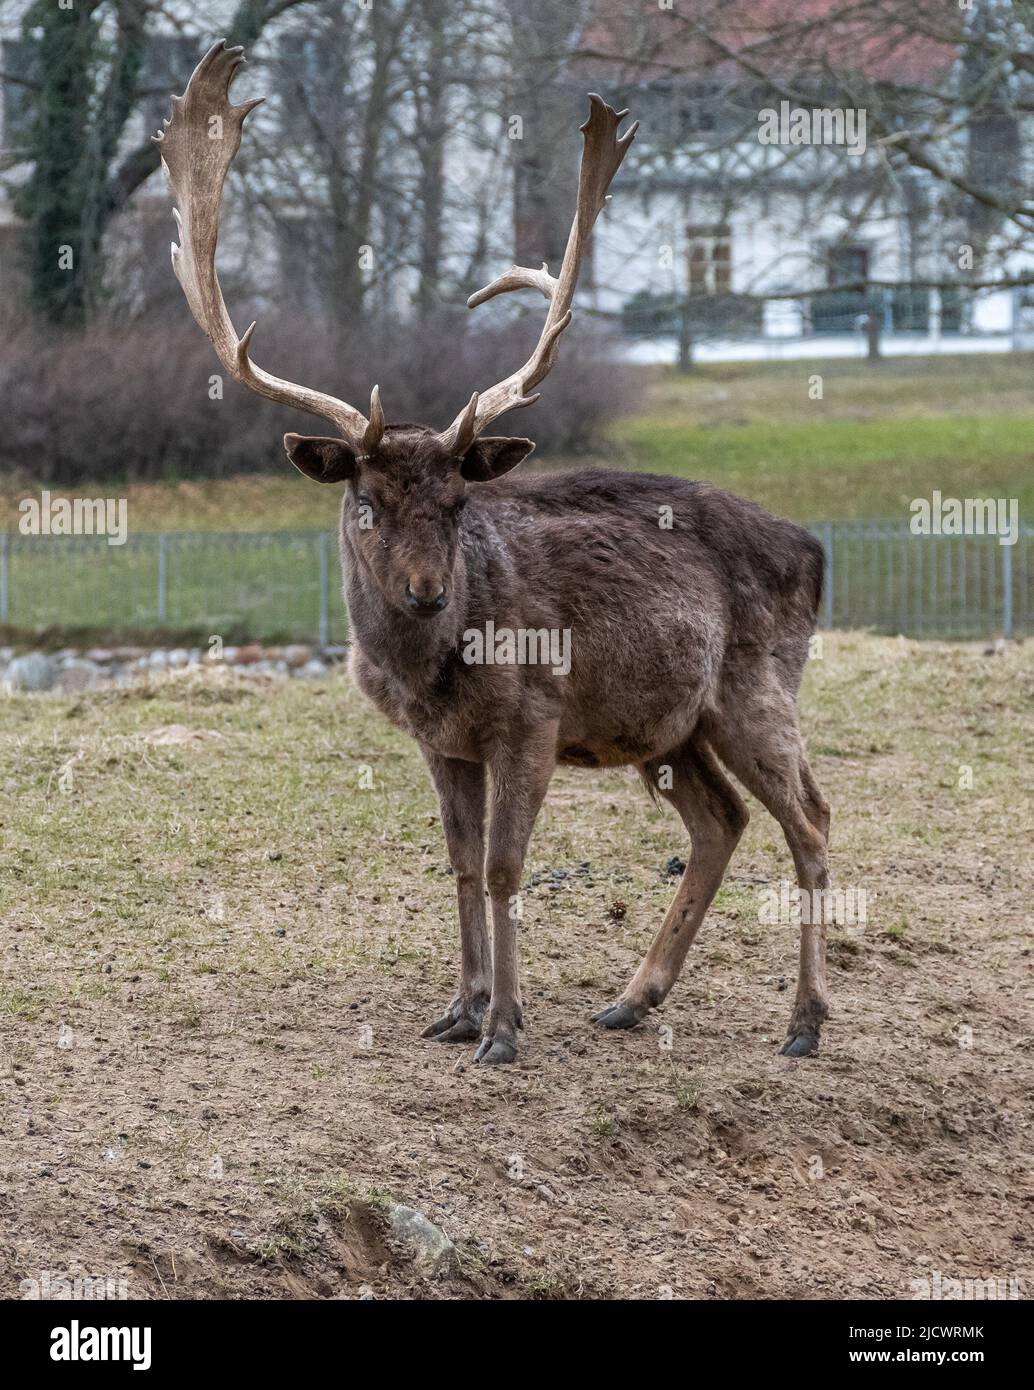 Imposing male fallow deer in an outdoor enclosure Stock Photo